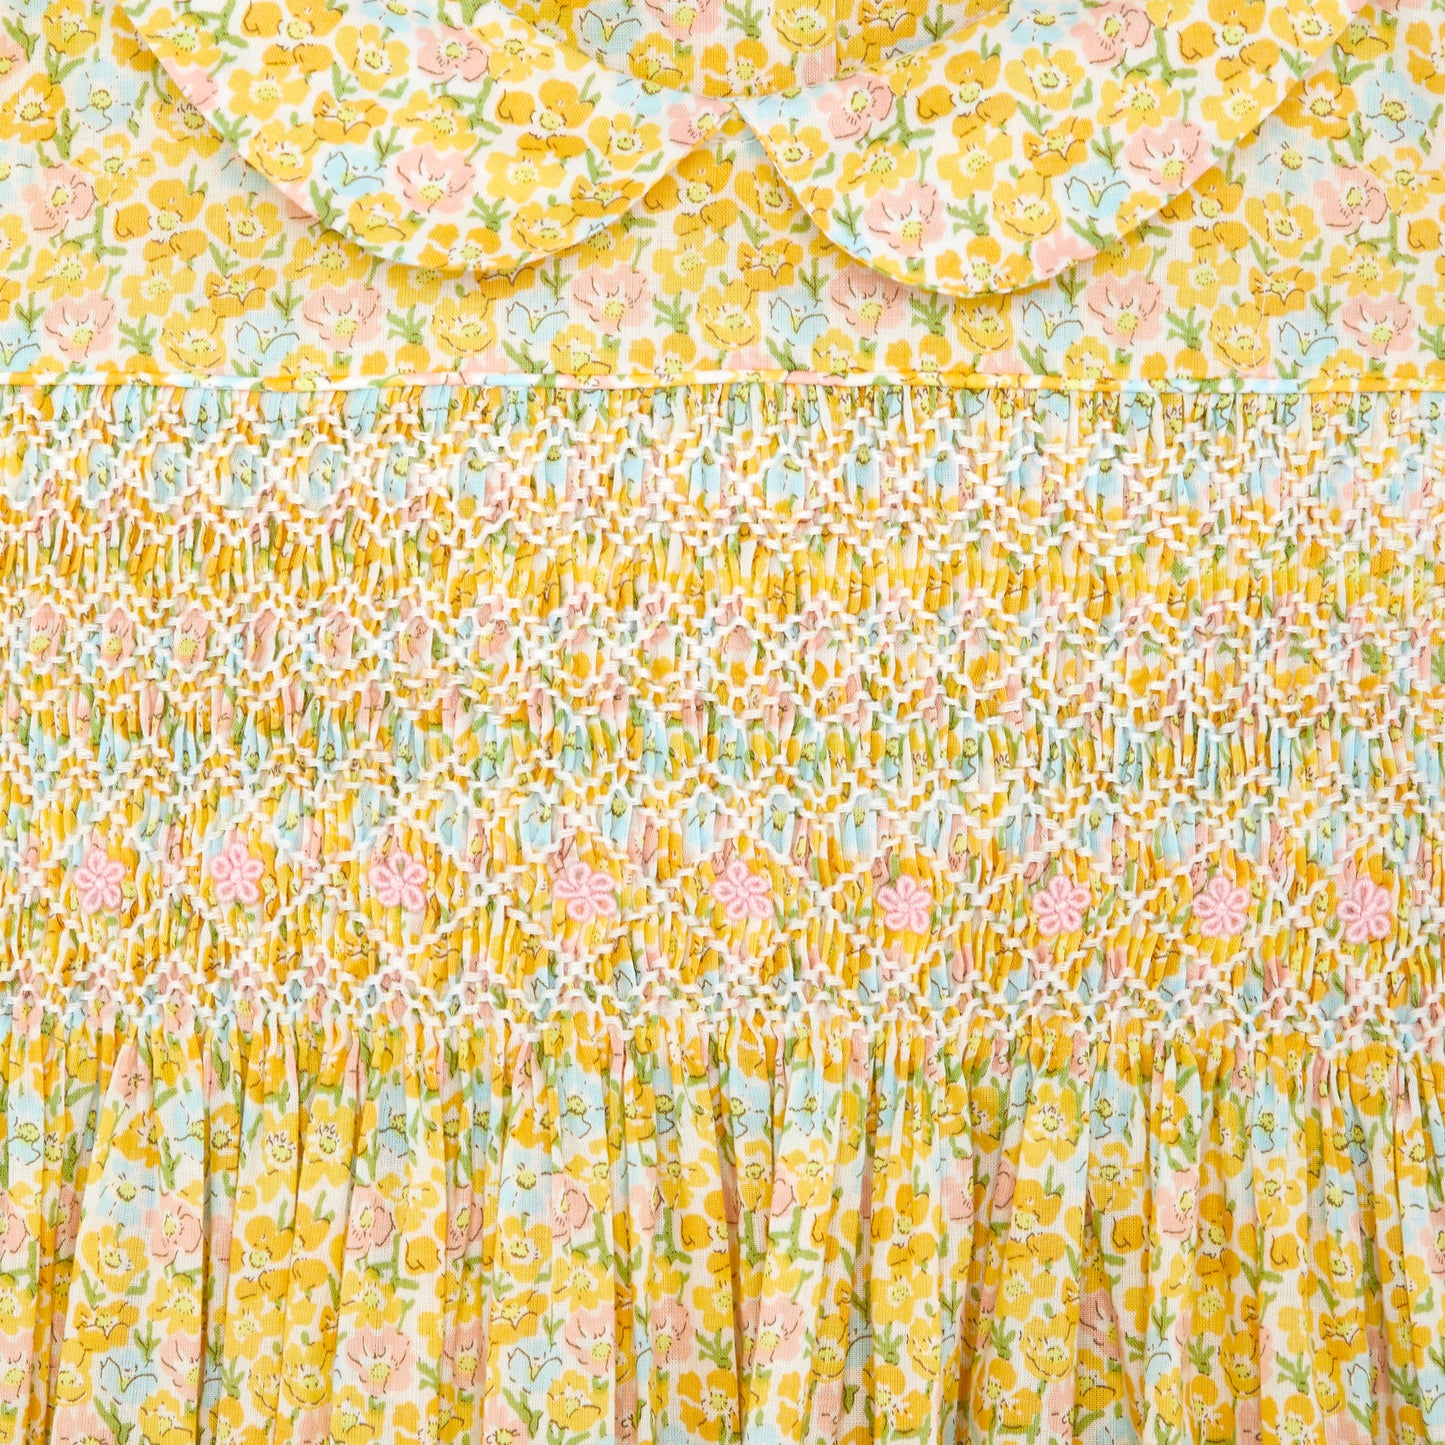 Sleeveless Yellow Flowers Smocked Dress - Question Everything SP24